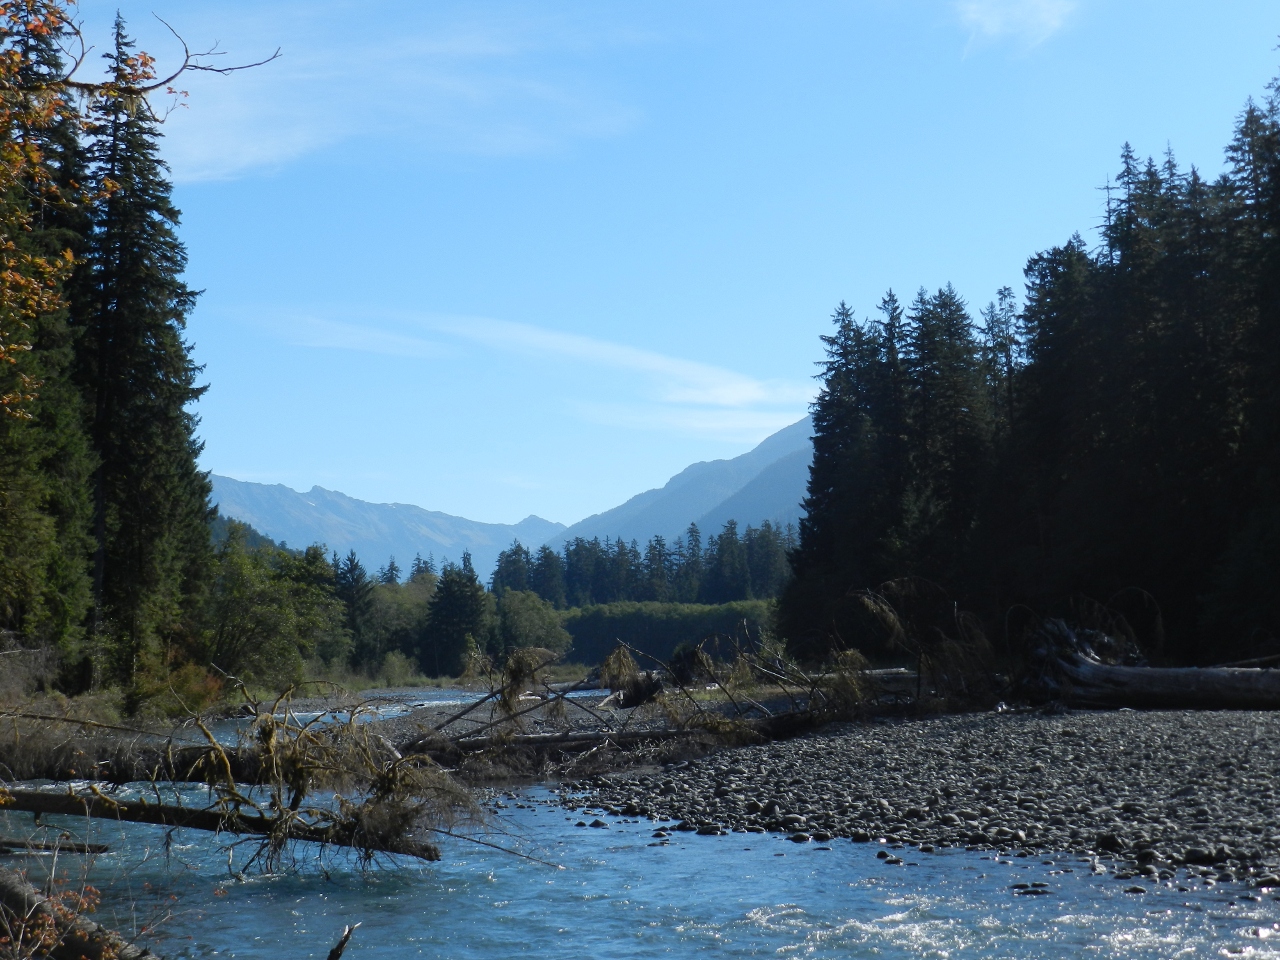 On the Hoh River